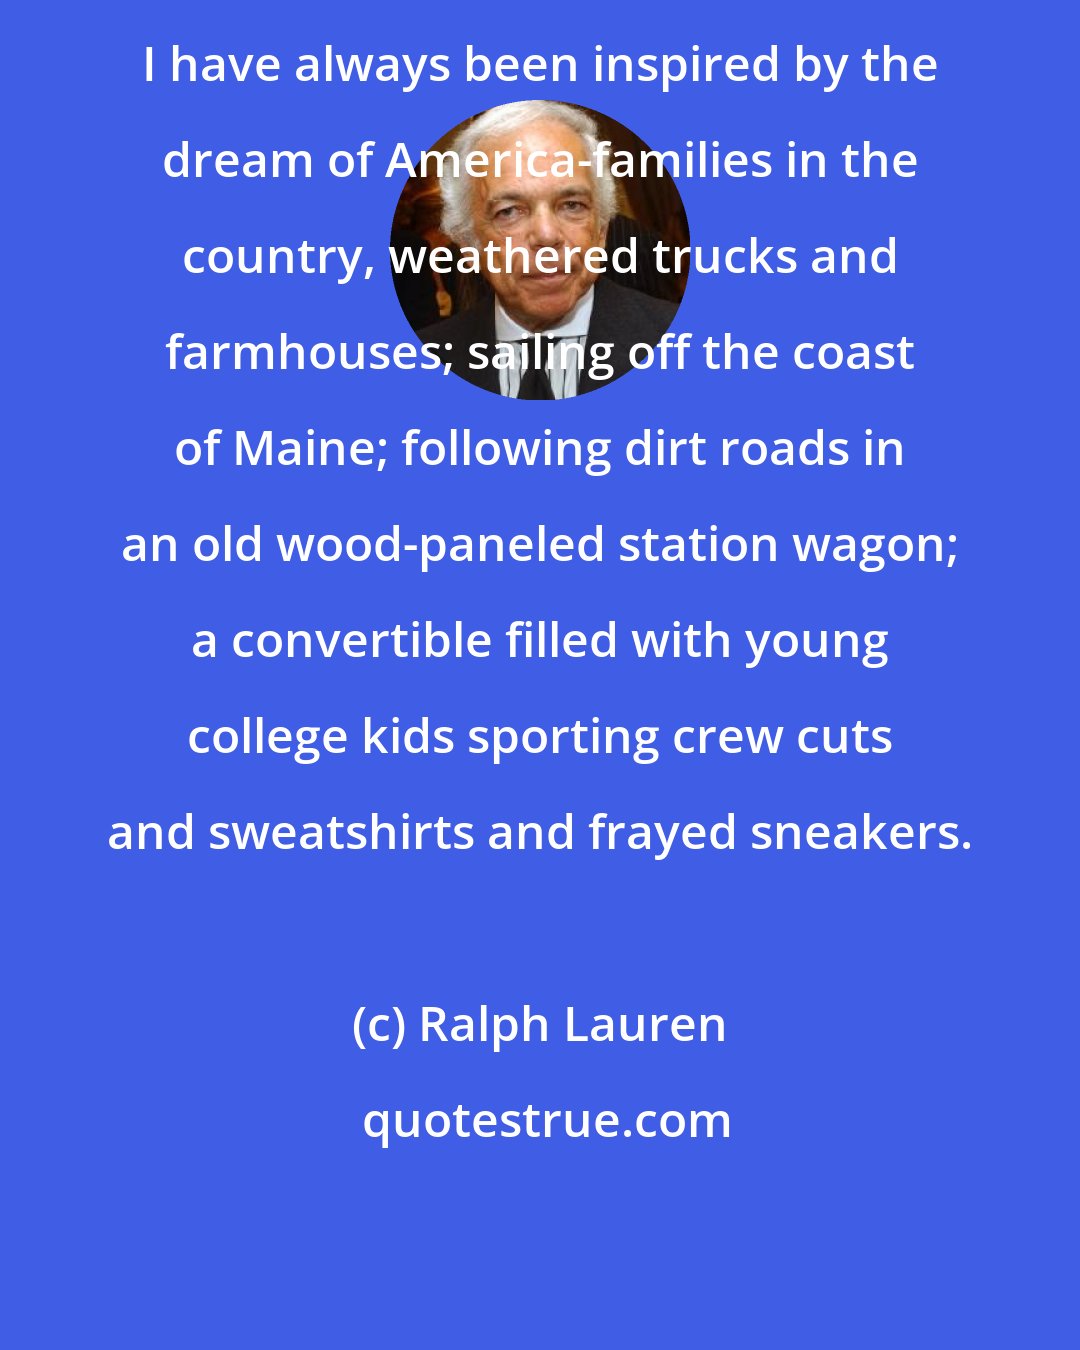 Ralph Lauren: I have always been inspired by the dream of America-families in the country, weathered trucks and farmhouses; sailing off the coast of Maine; following dirt roads in an old wood-paneled station wagon; a convertible filled with young college kids sporting crew cuts and sweatshirts and frayed sneakers.